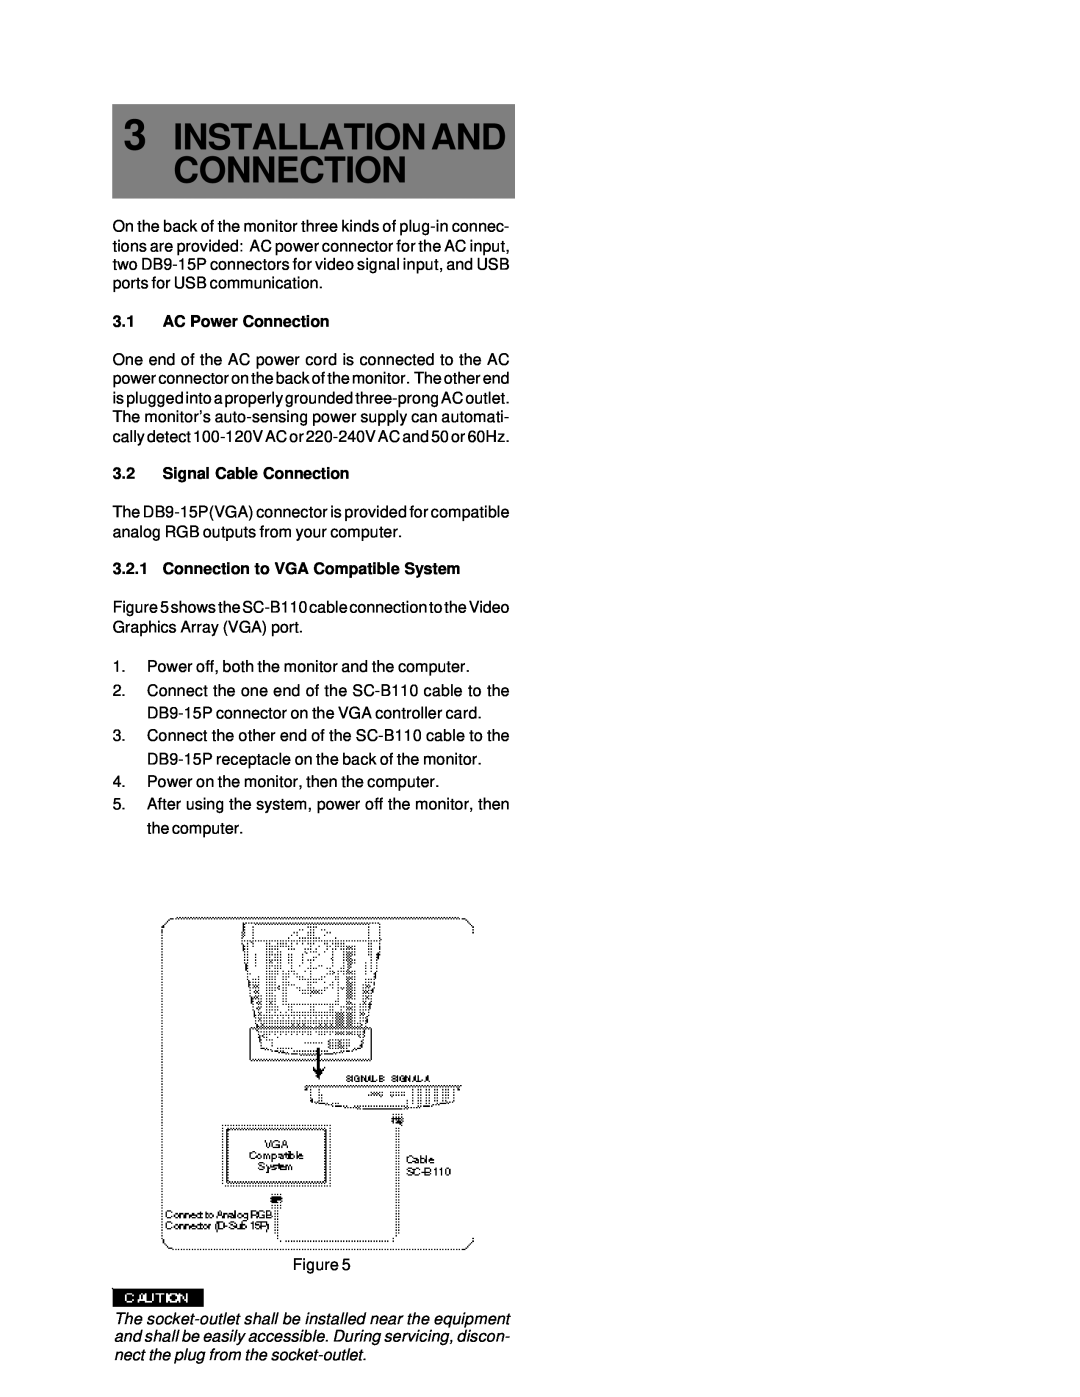 Compaq 1220 Installation And Connection, AC Power Connection, Signal Cable Connection, Connection to VGA Compatible System 